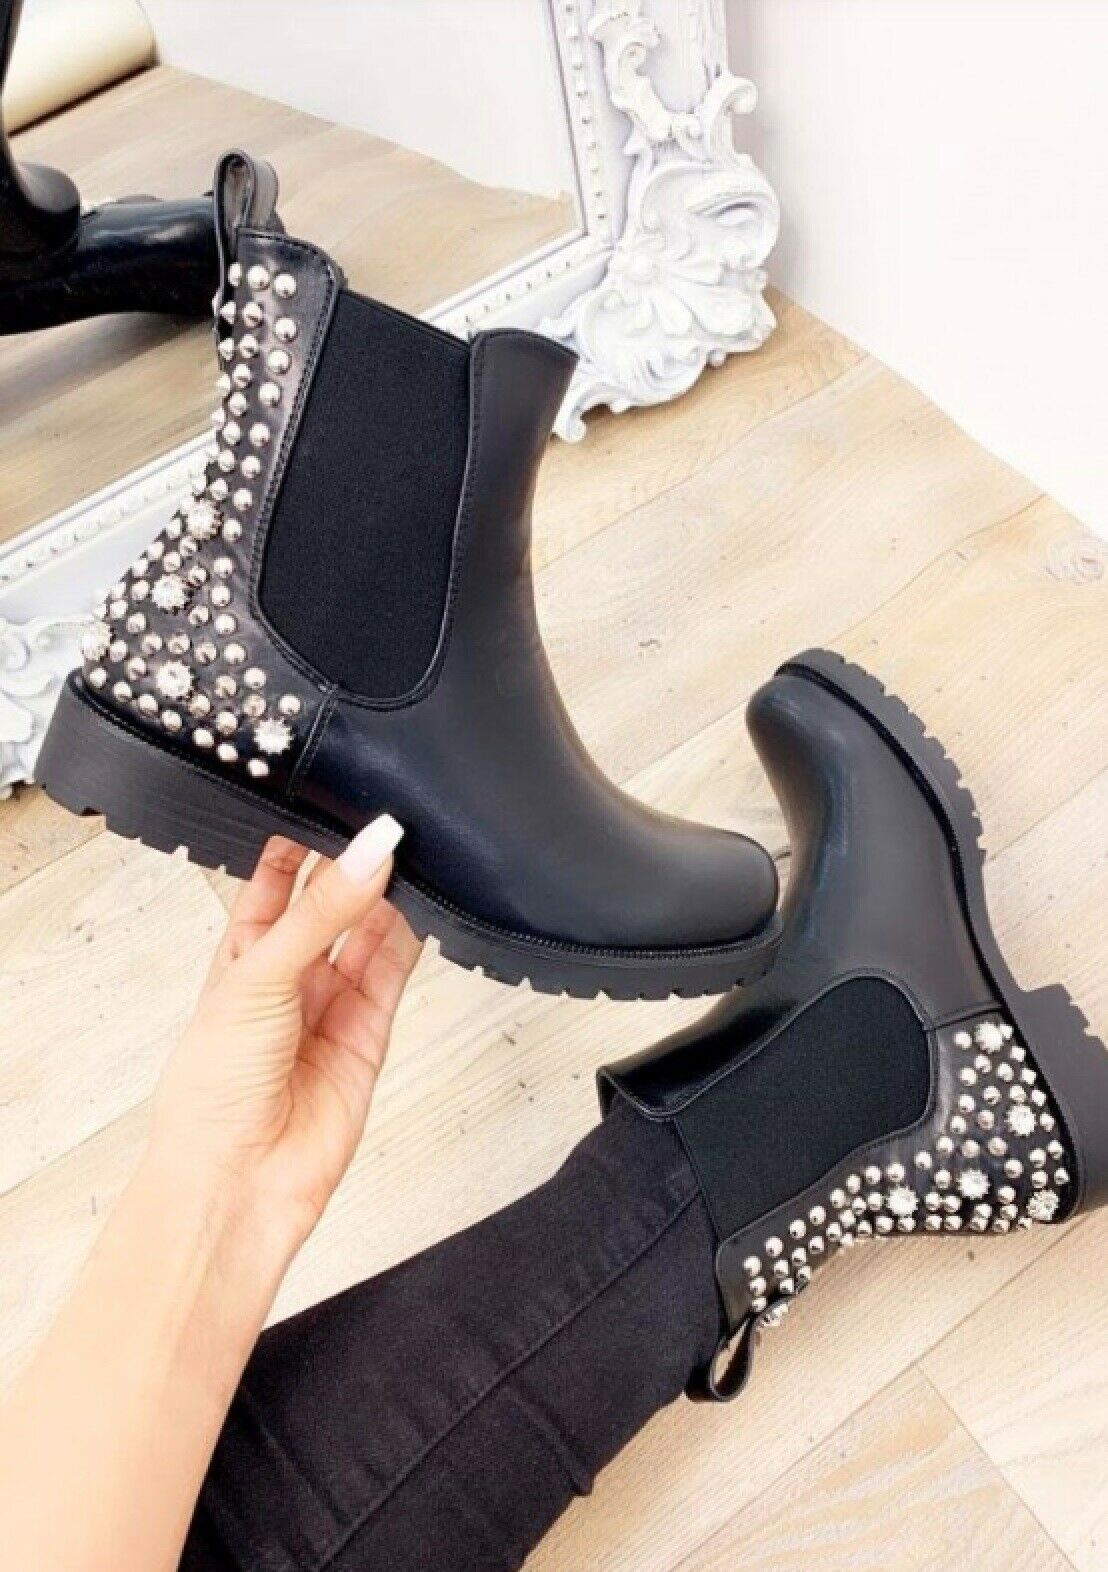 Women Studded Ankle Boots High Heels Lace Up Shoes Side Zip Booties Party  Casual | eBay